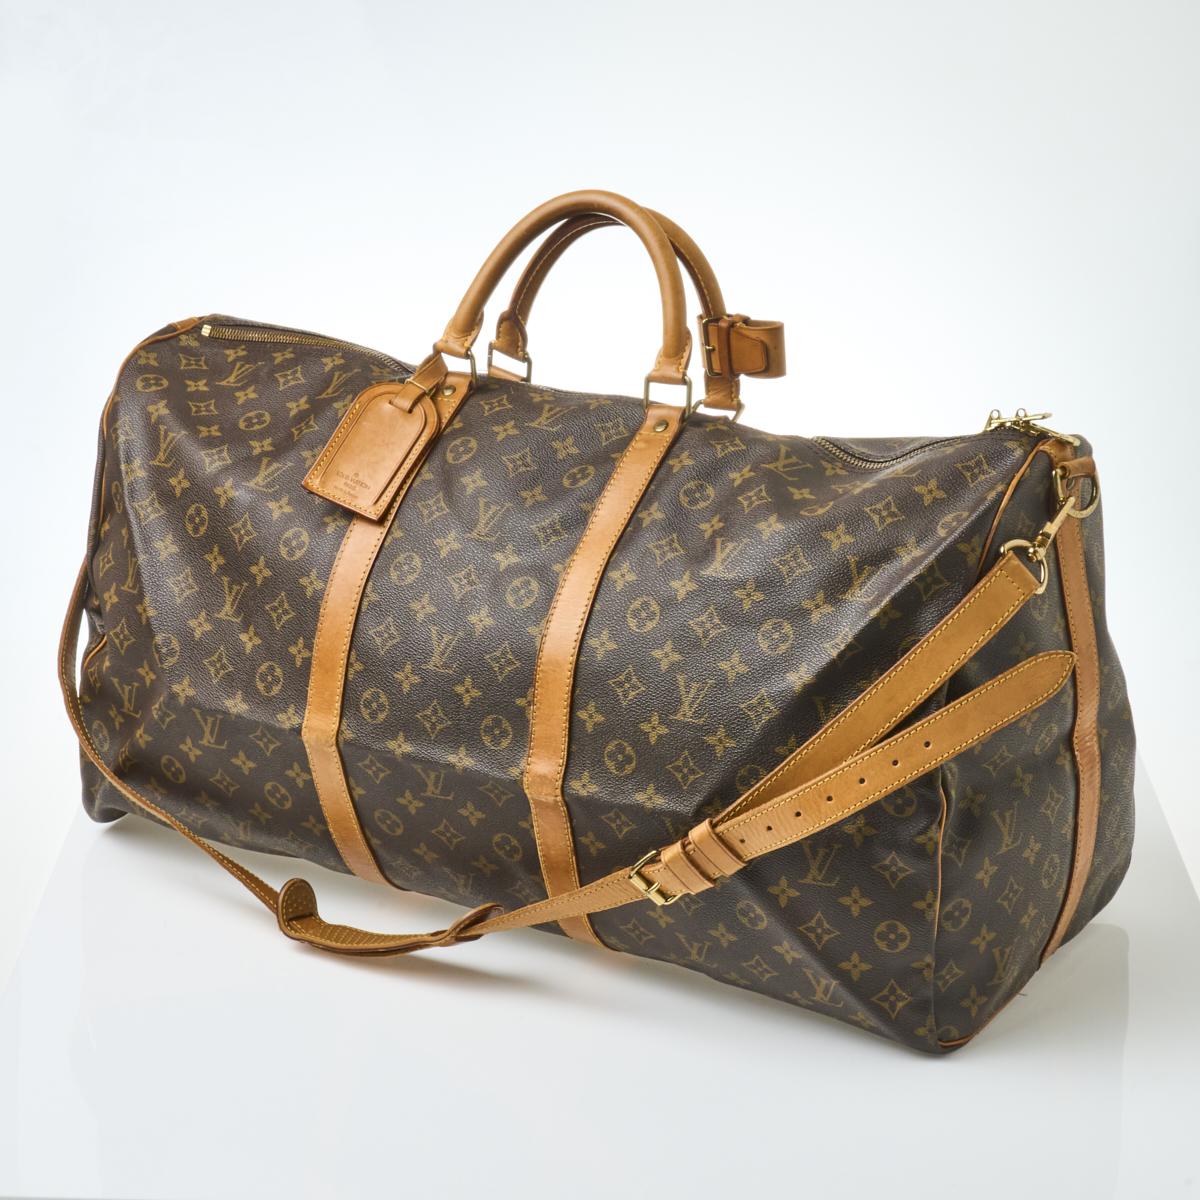 Sold at Auction: A Louis Vuitton monogram canvas suit carrier 60 with  Vachetta leather handle and trim, gold tone hardware